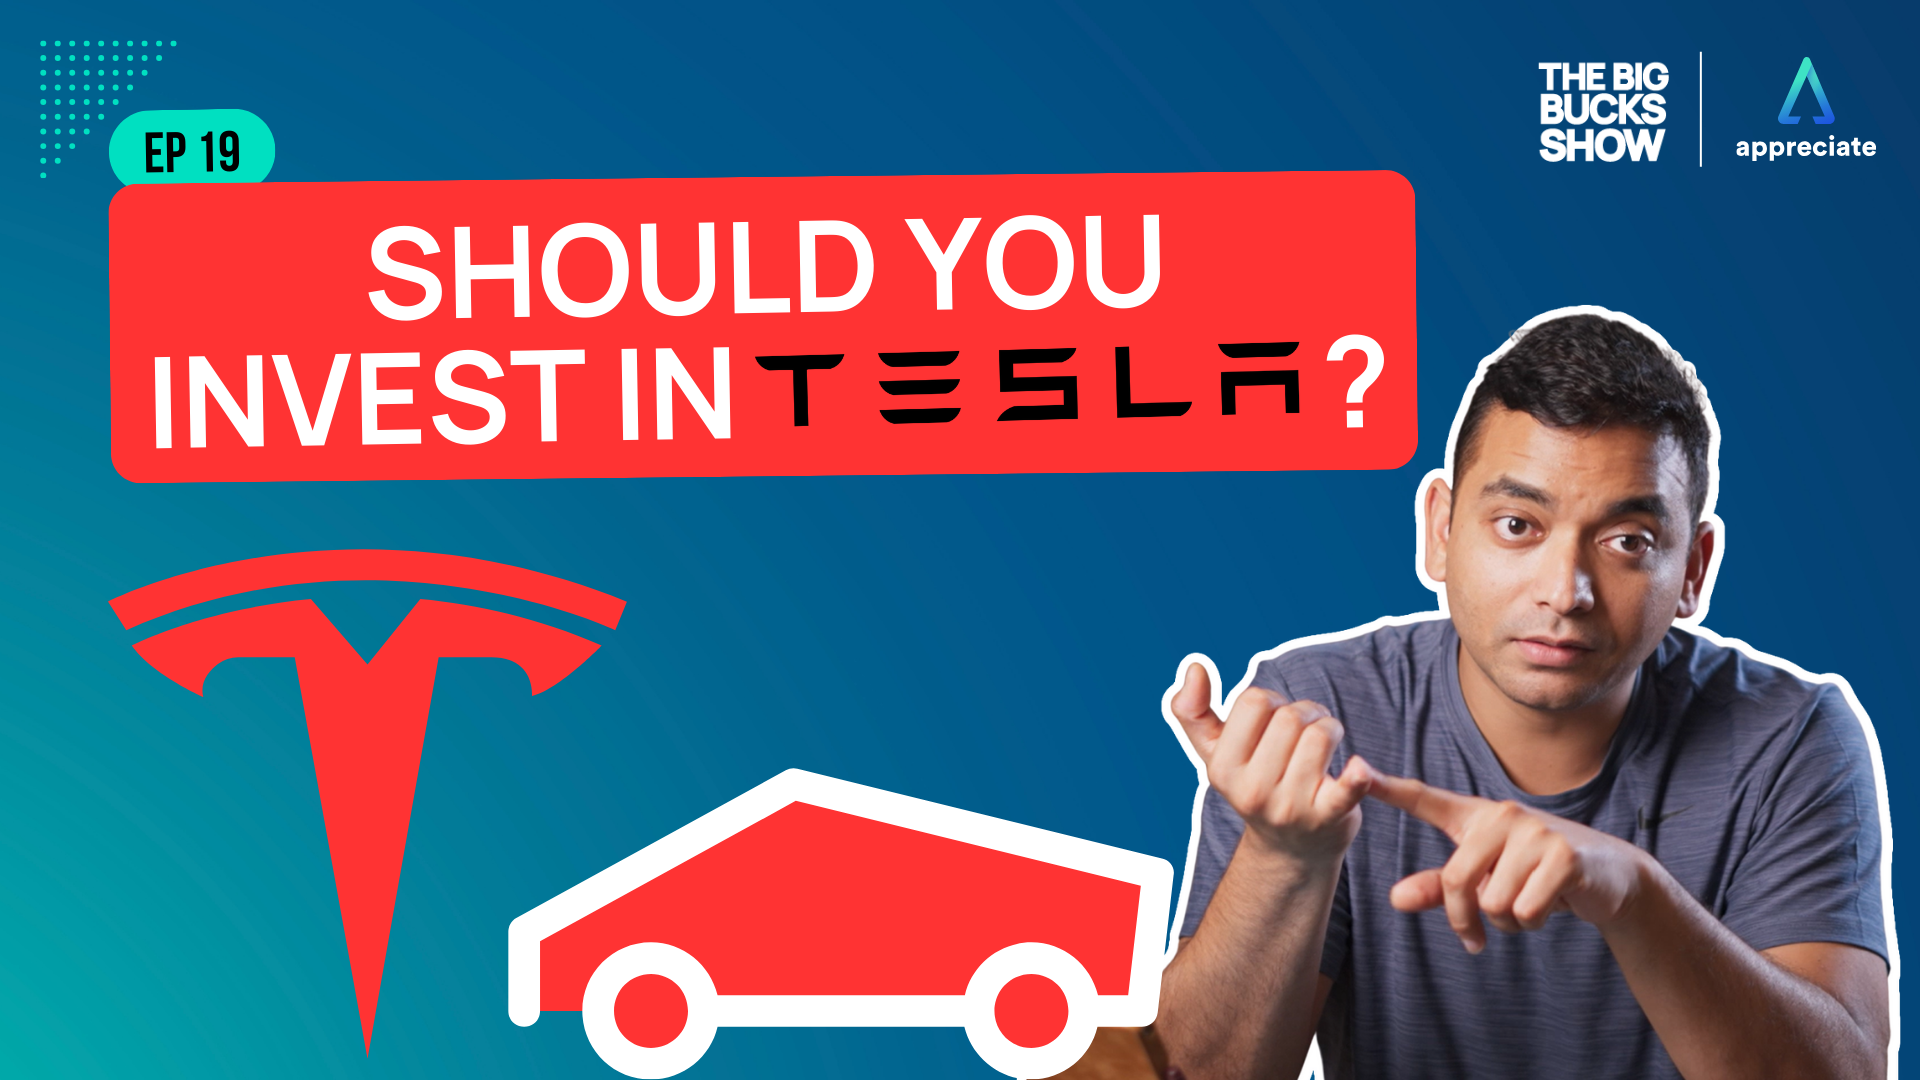 Should you invest in Tesla? - Thumbnail